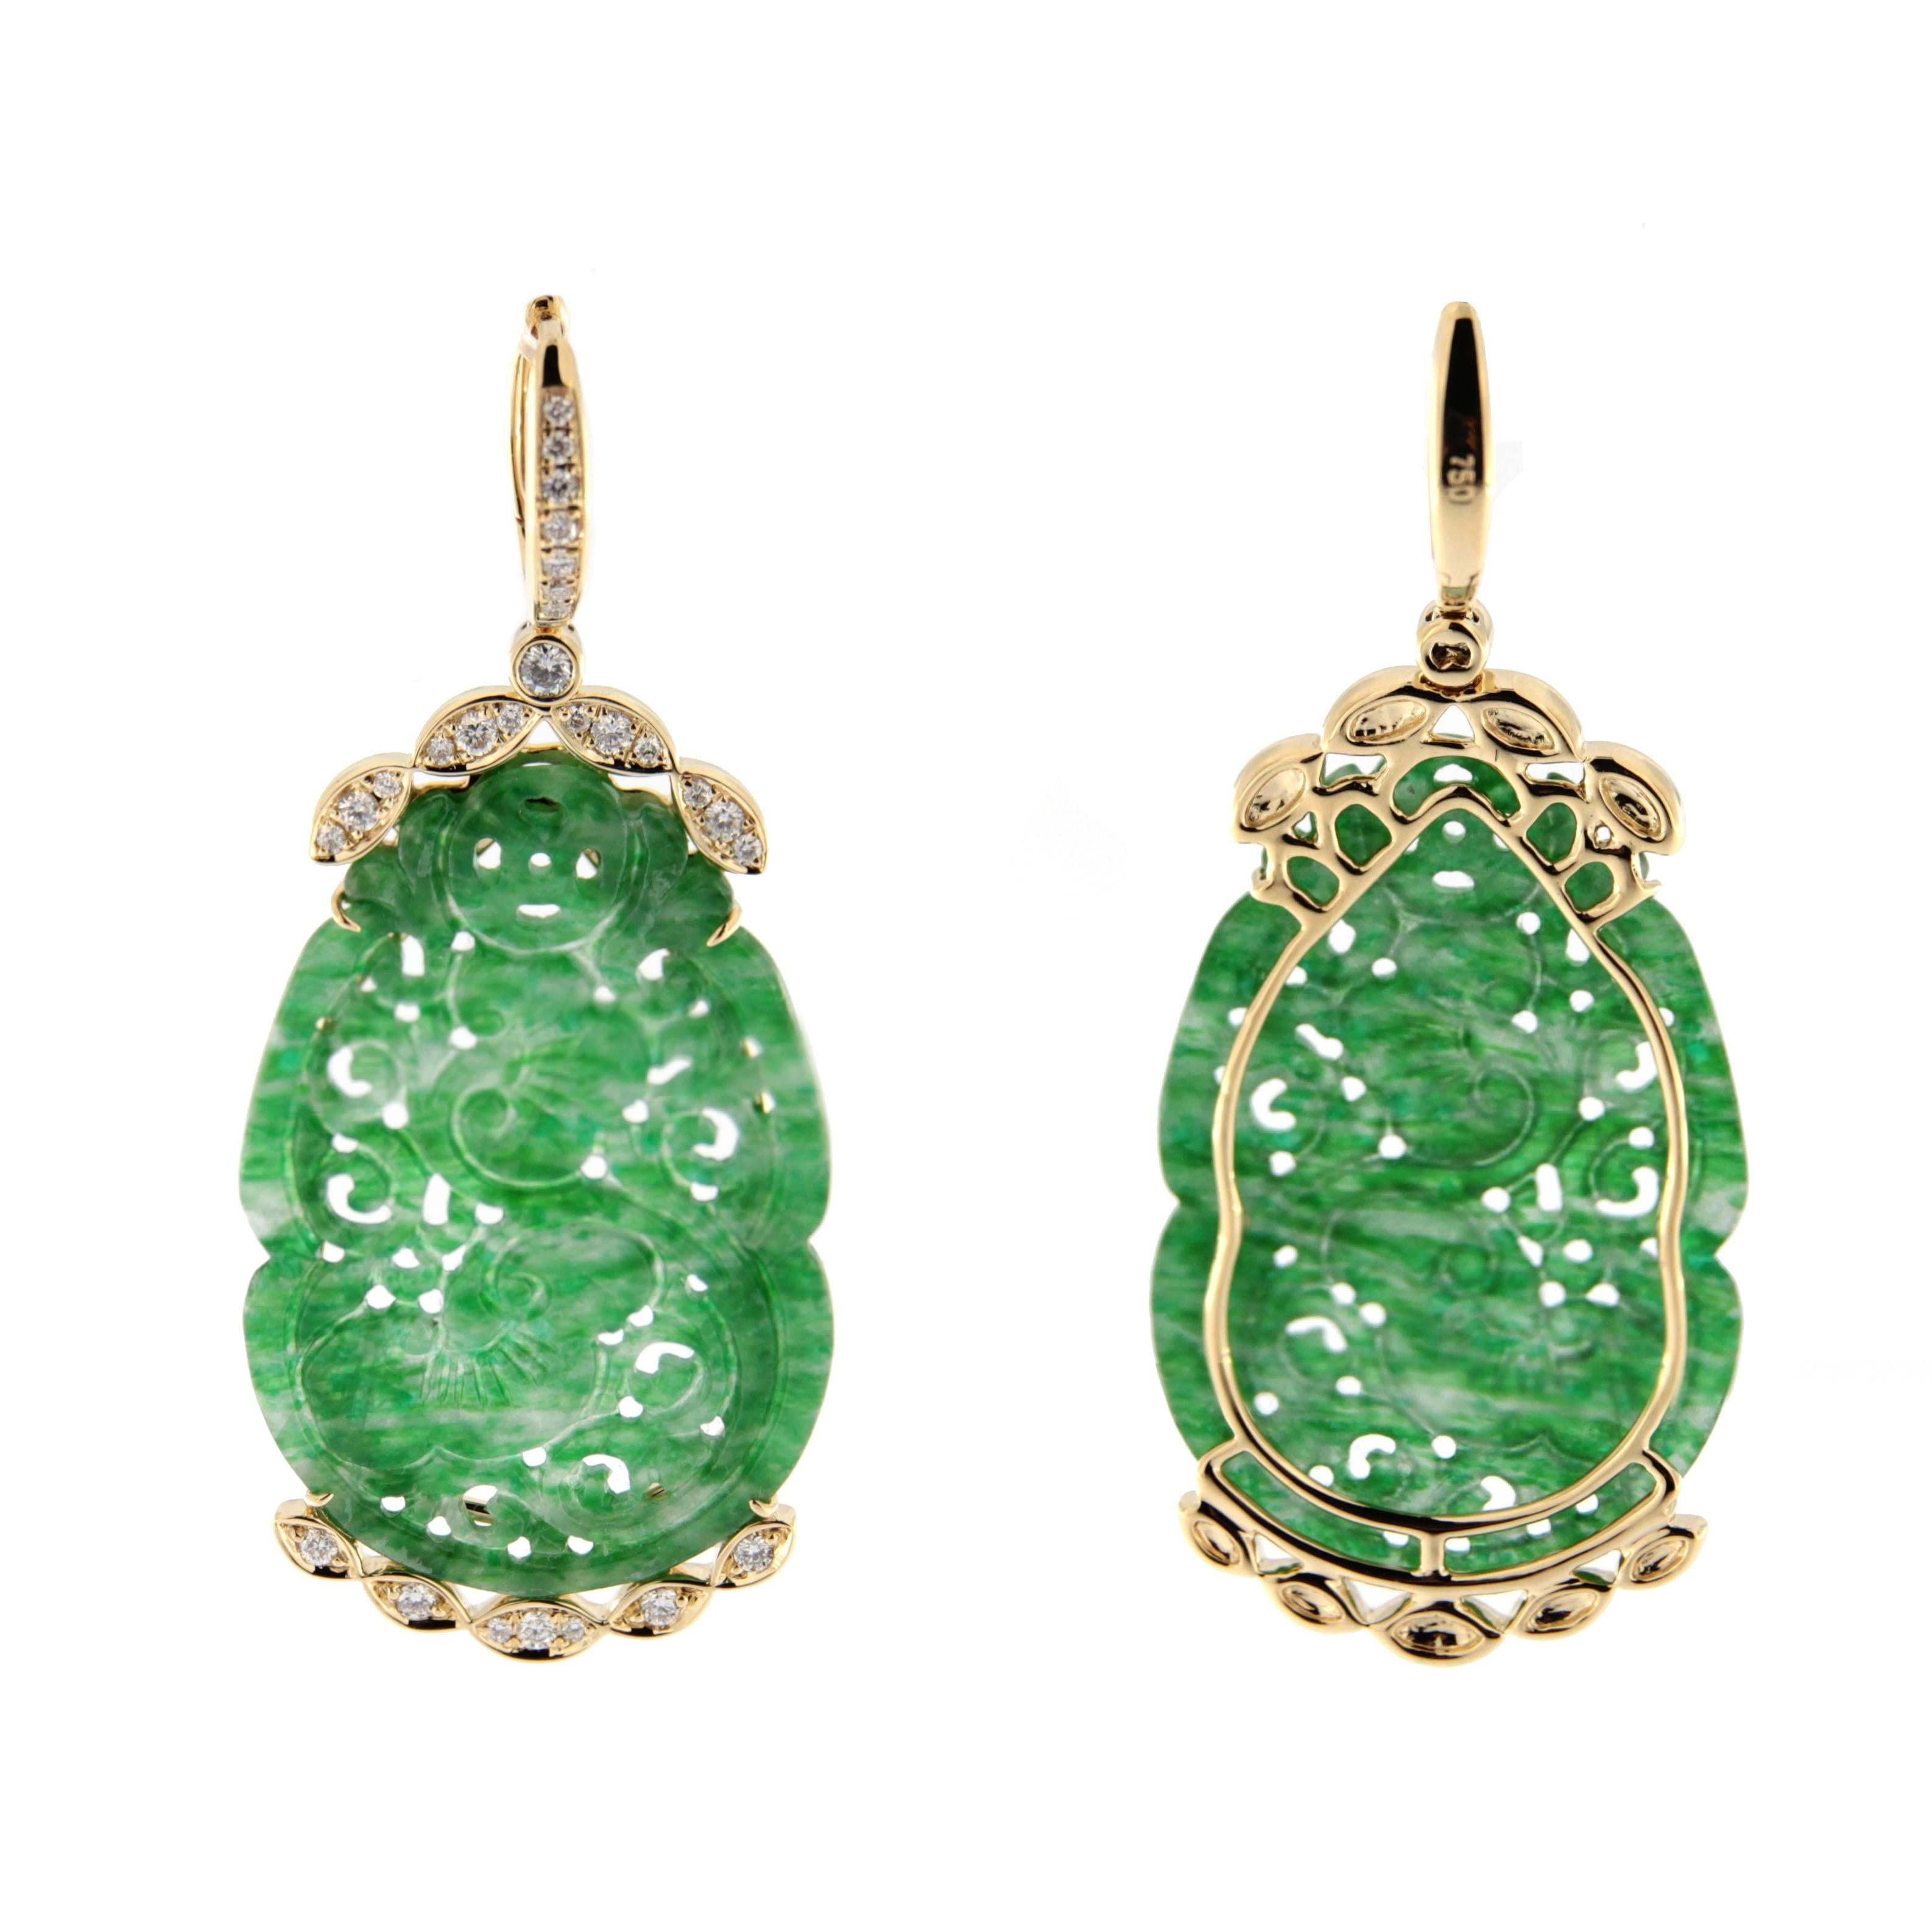 Jona design collection, hand crafted in Italy, 18 karat yellow gold dangle earrings, consisting of 2 carved Burmese jade elements adorned with 0.53 carats of white diamonds.   

All Jona jewelry is new and has never been previously owned or worn.